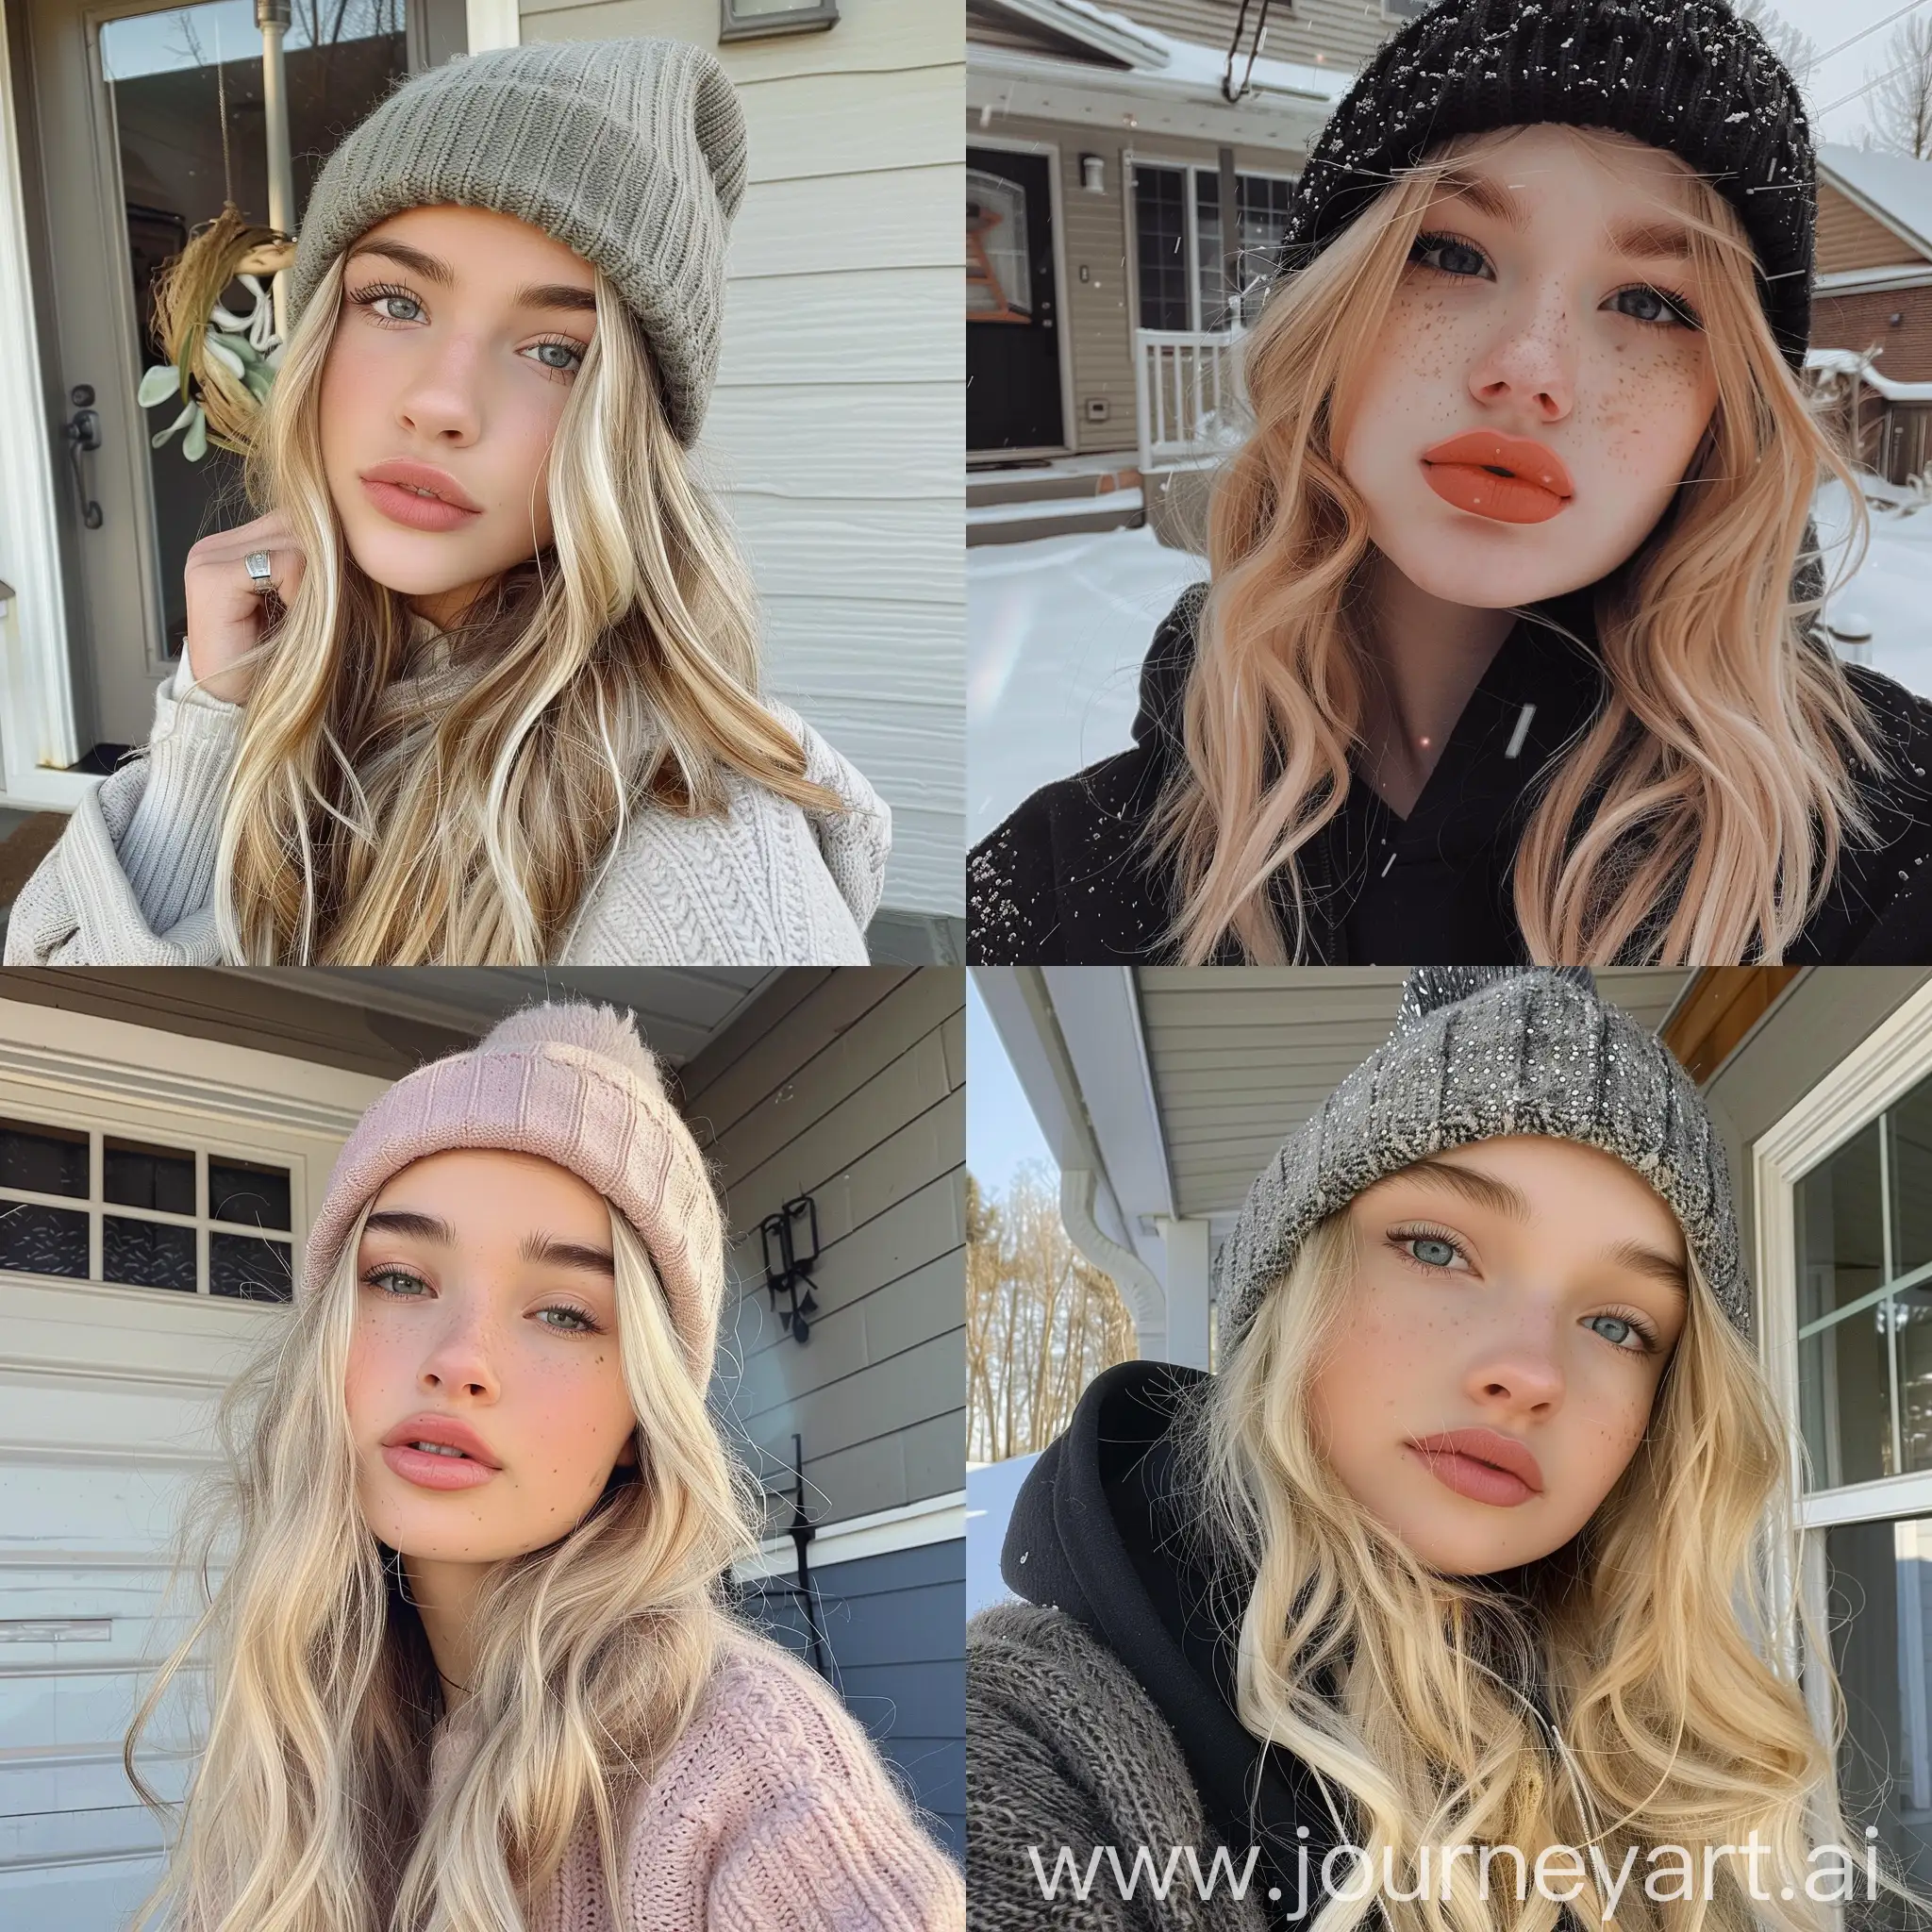 Aesthetic Instagram selfie of a teenage girl in front of house, adorable, cute, matte makeup, blonde, beanie, close up selfie 